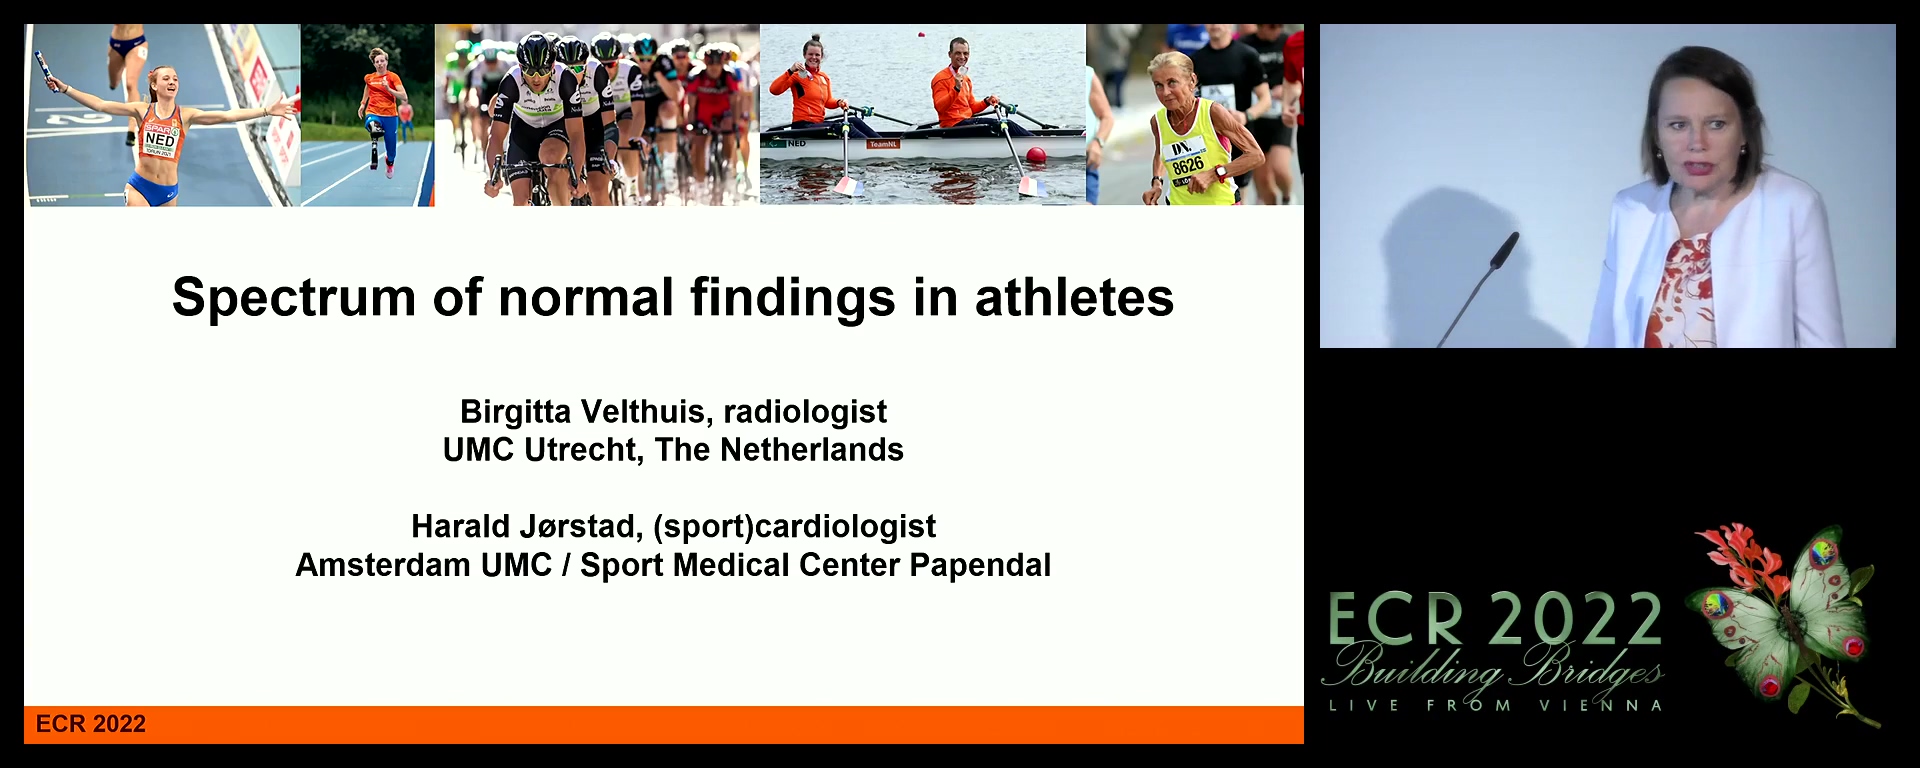 The spectrum of normal cardiac appearances in athletes